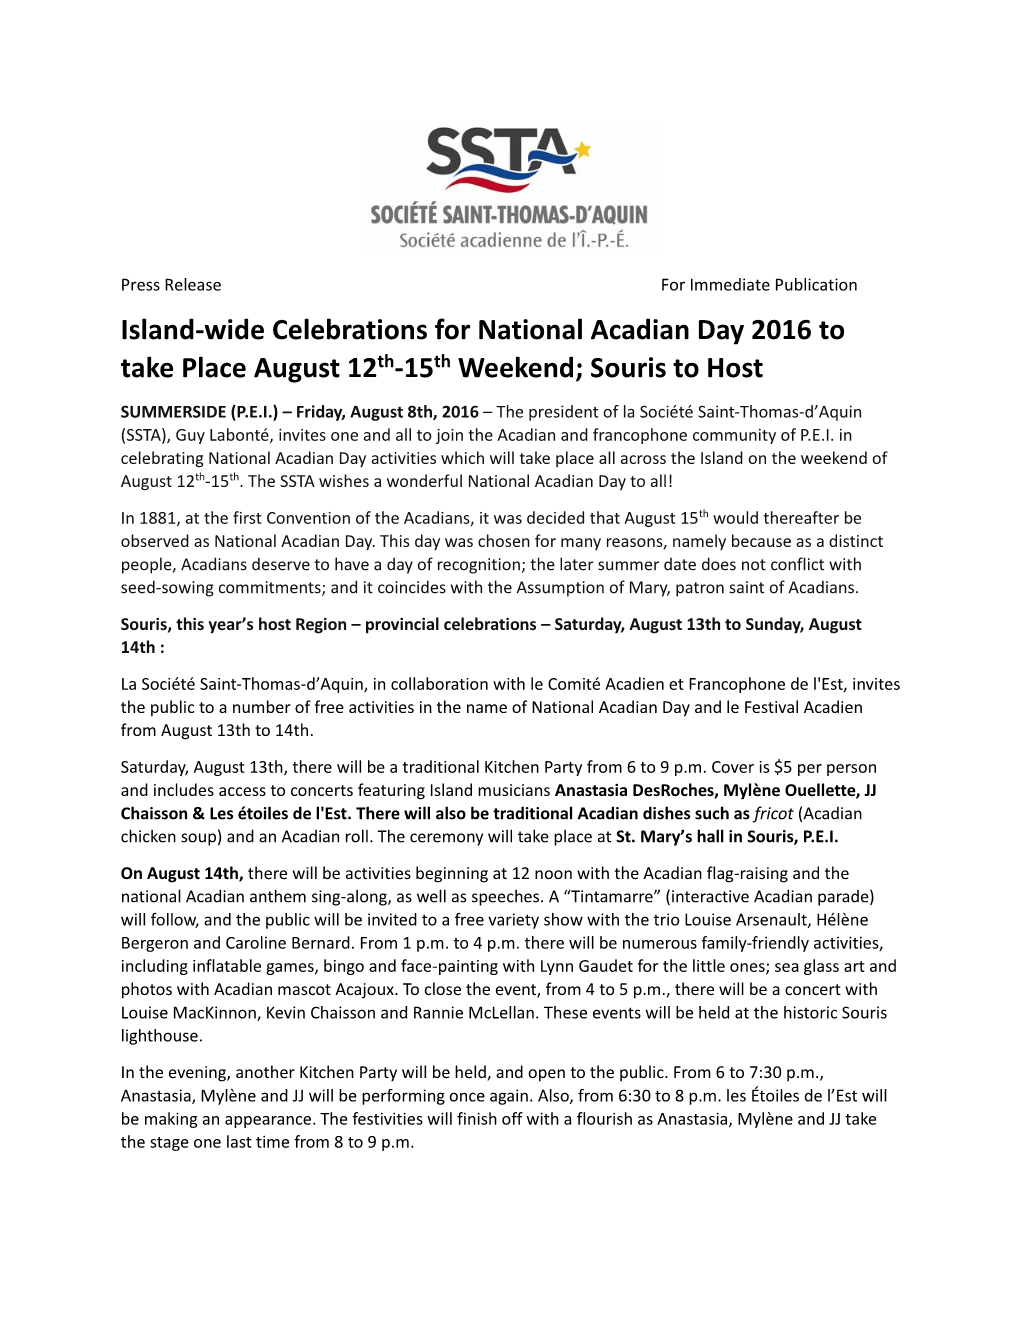 Island-Wide Celebrations for National Acadian Day 2016 to Take Place August 12Th-15Th Weekend; Souris to Host